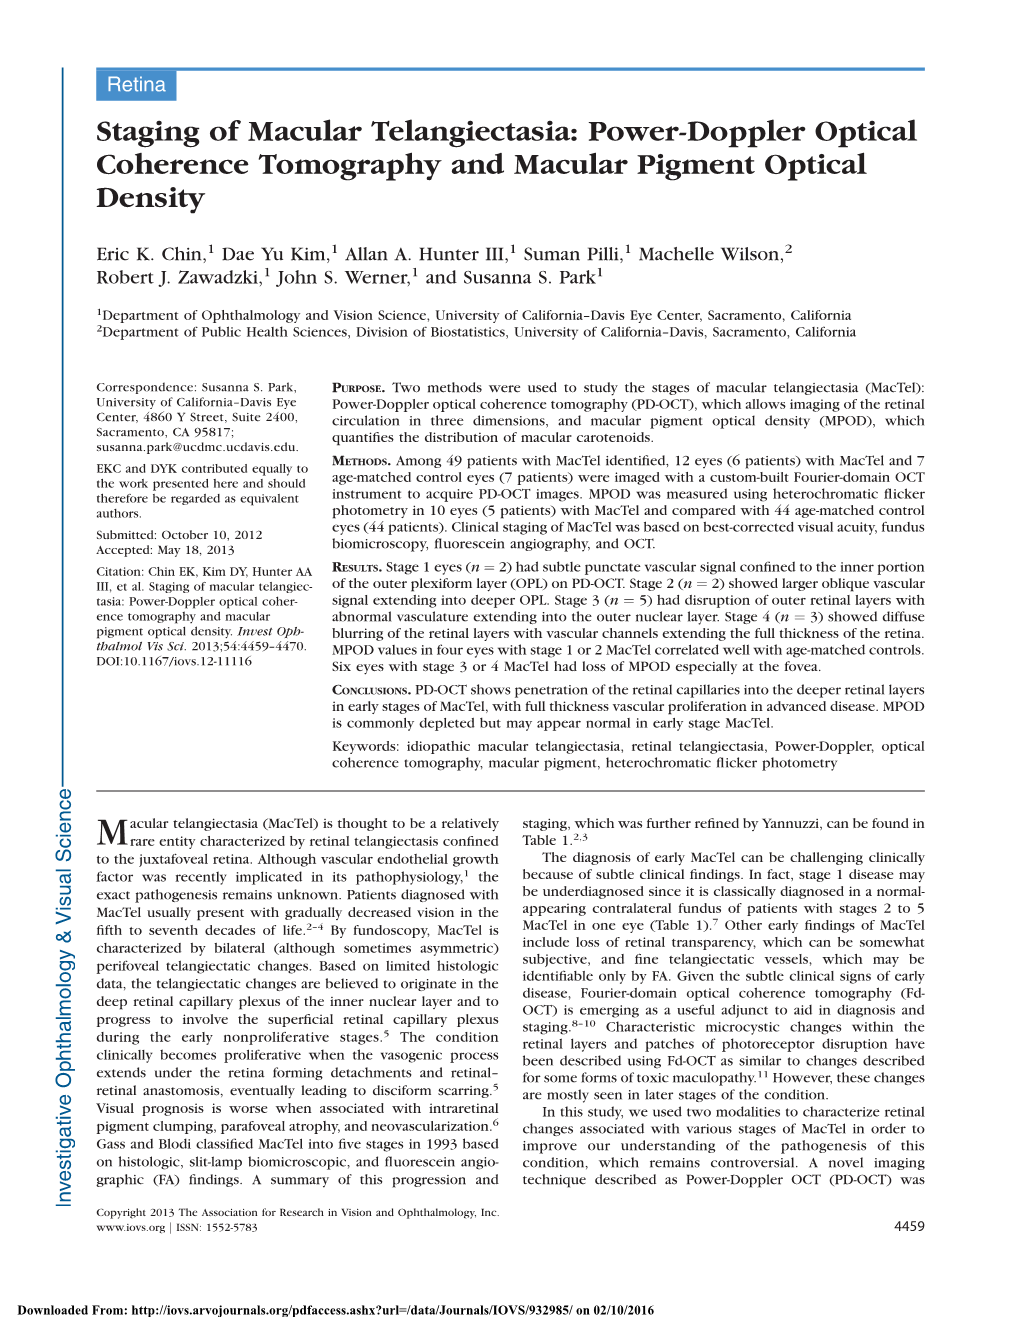 Power-Doppler Optical Coherence Tomography and Macular Pigment Optical Density